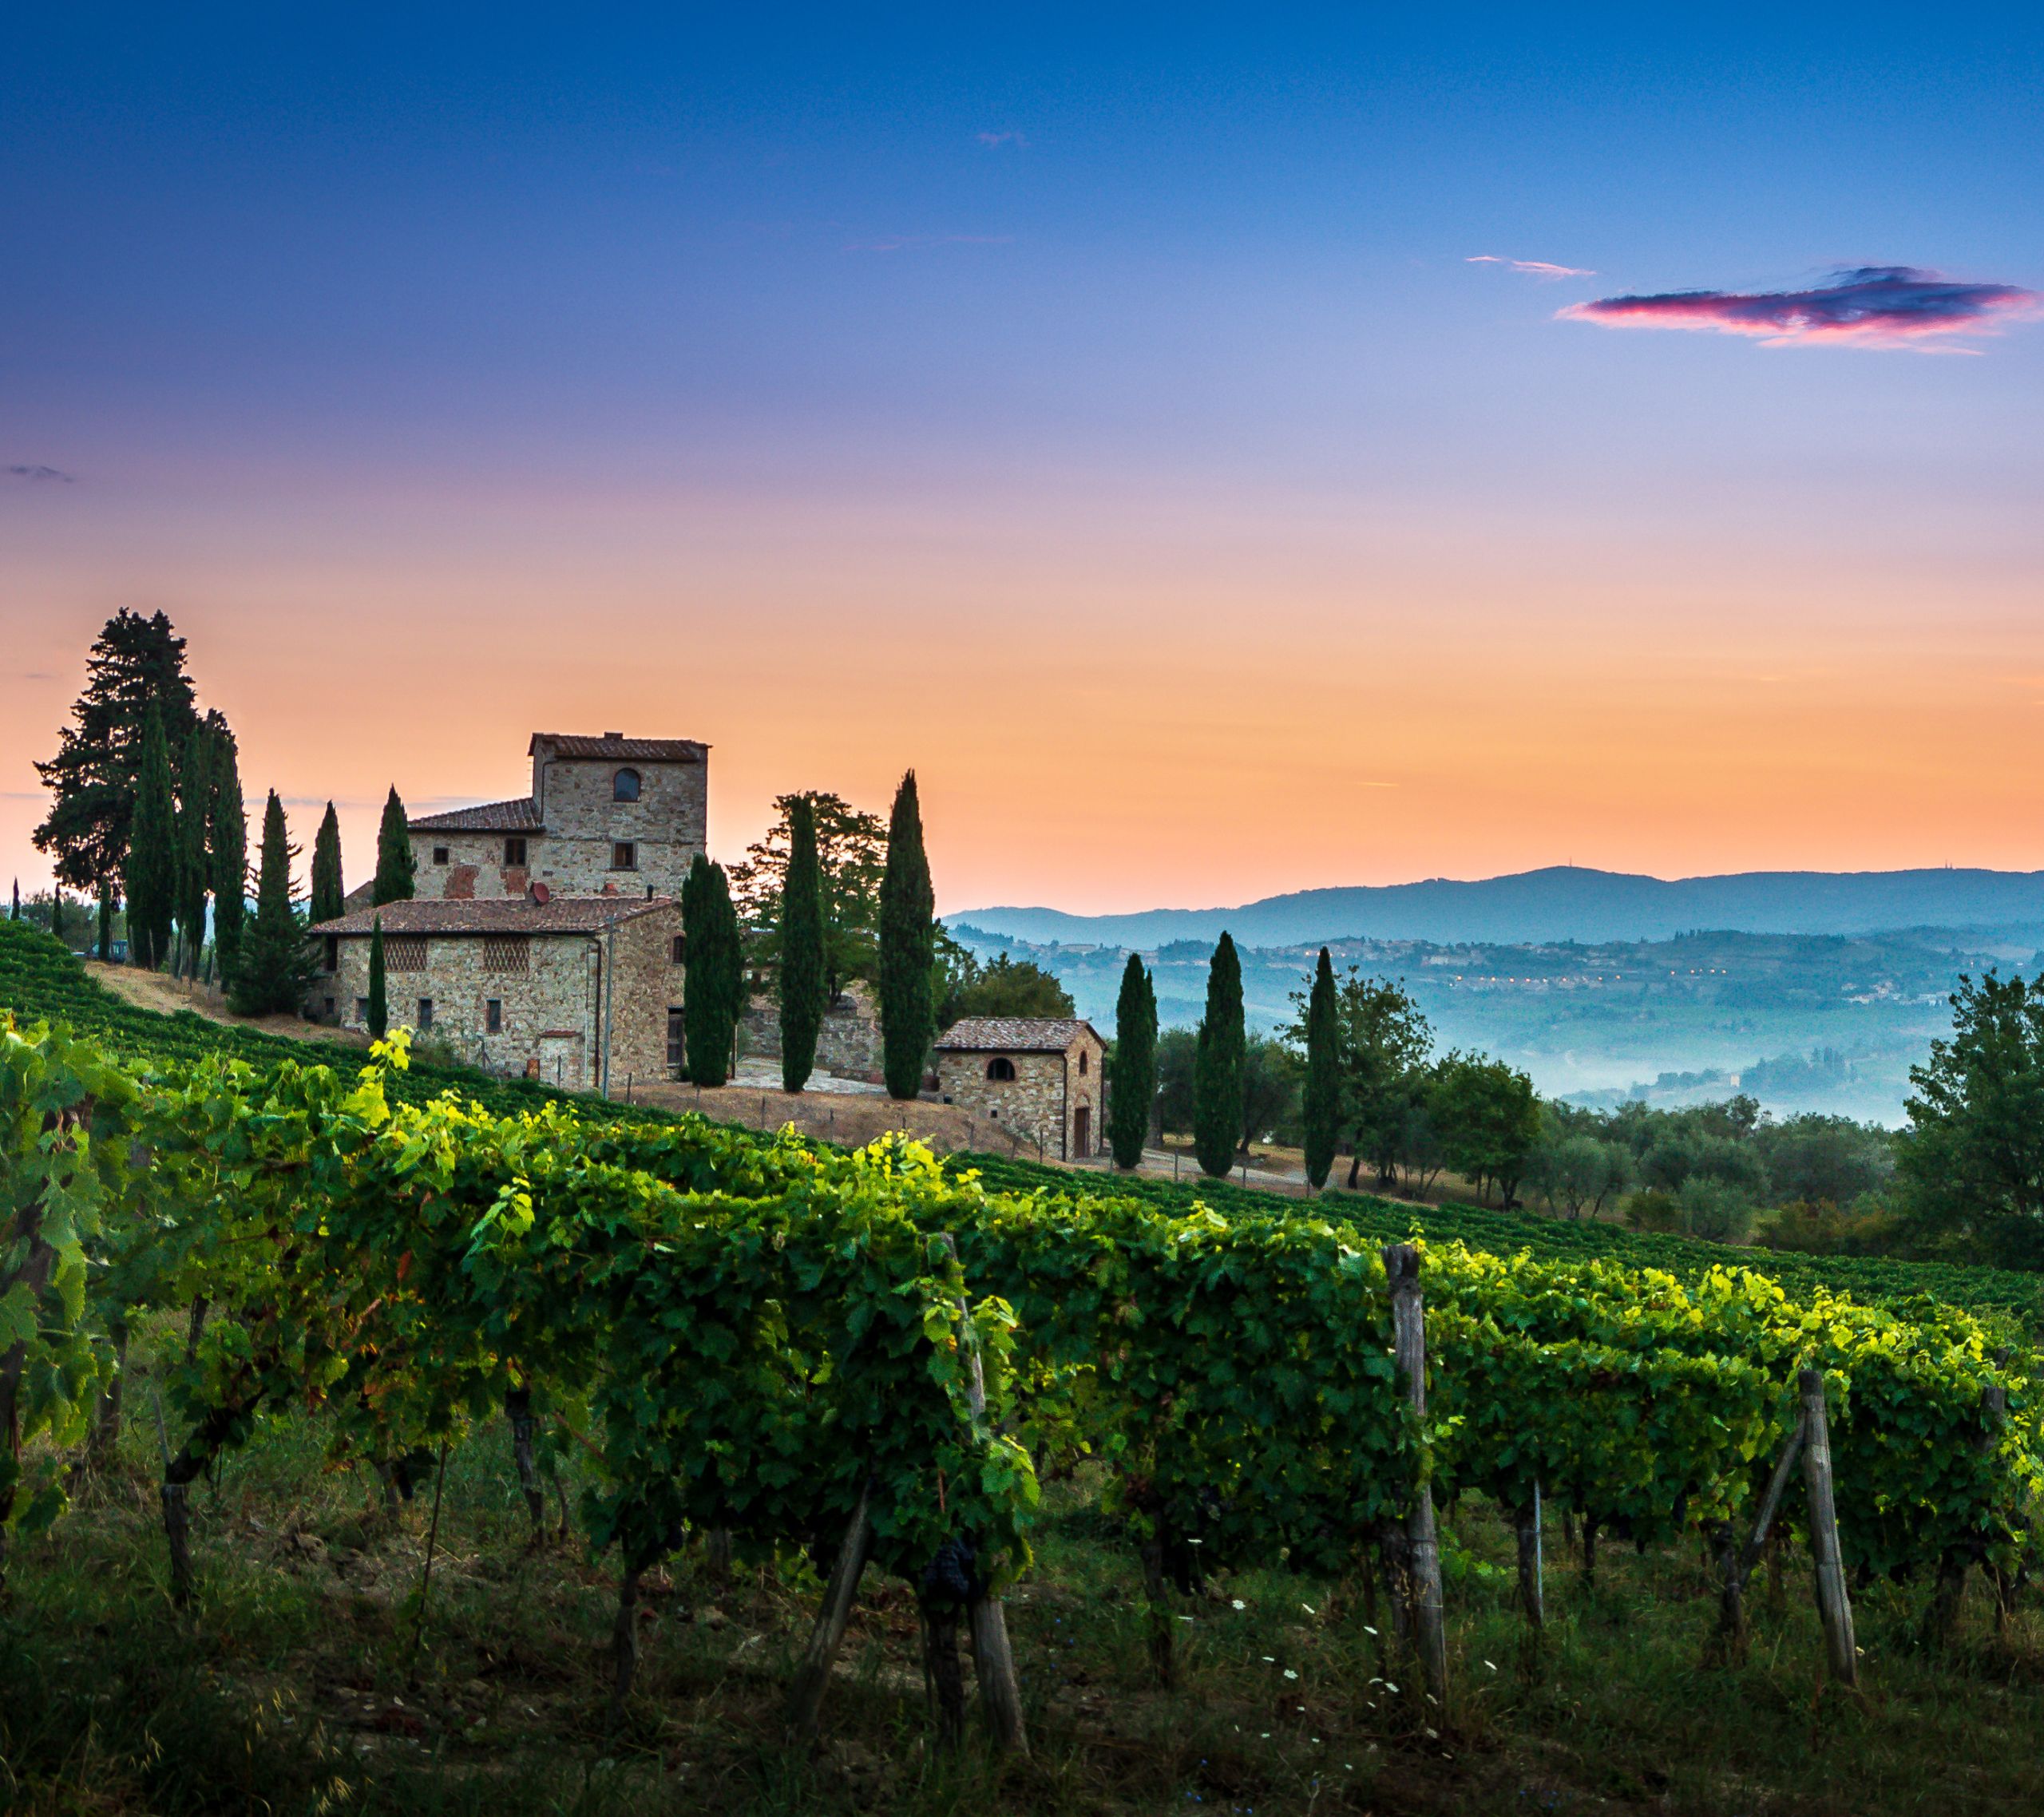 best chianti wine tours from florence